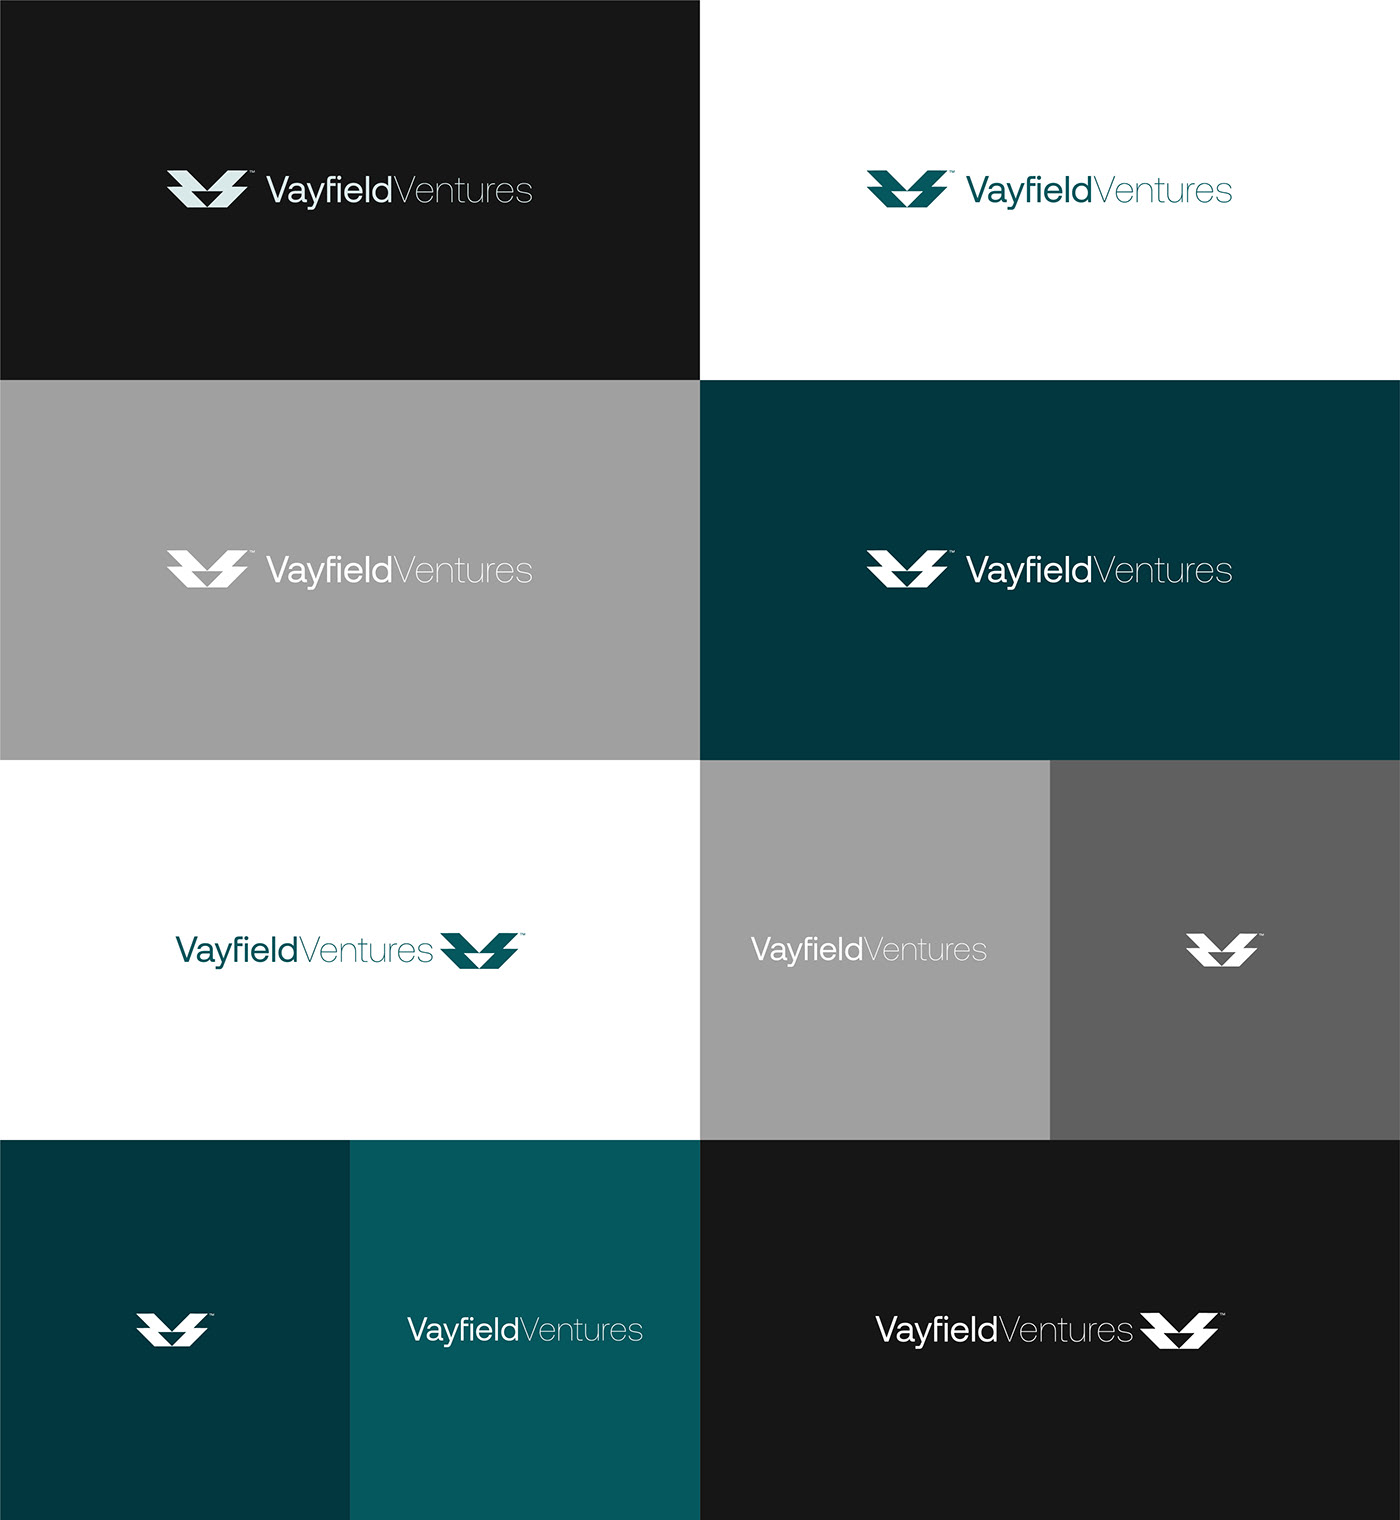 brand guidelines brand identity Corporate Identity finance Fintech investment banking Investment company Investment Management Logo Design visual identity